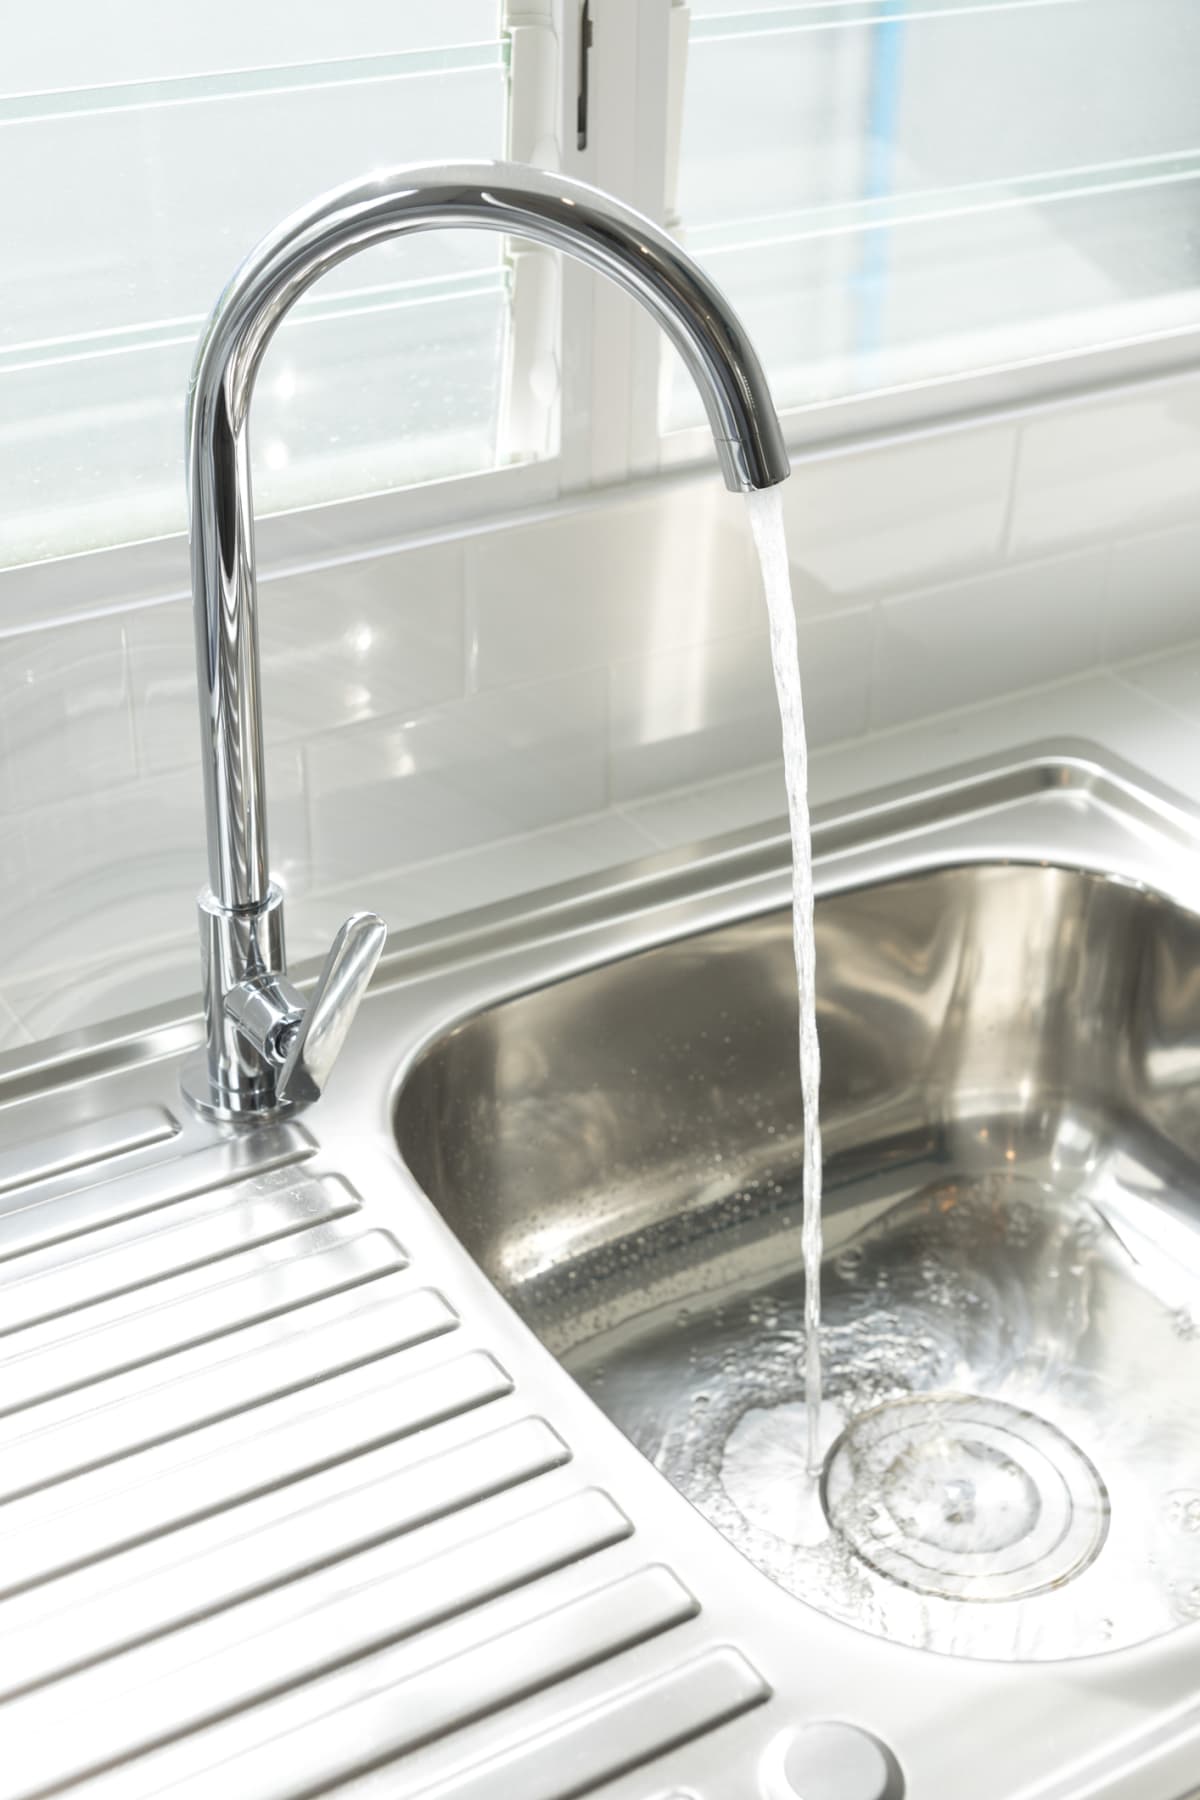 Stainless steel sink with water running from the faucet